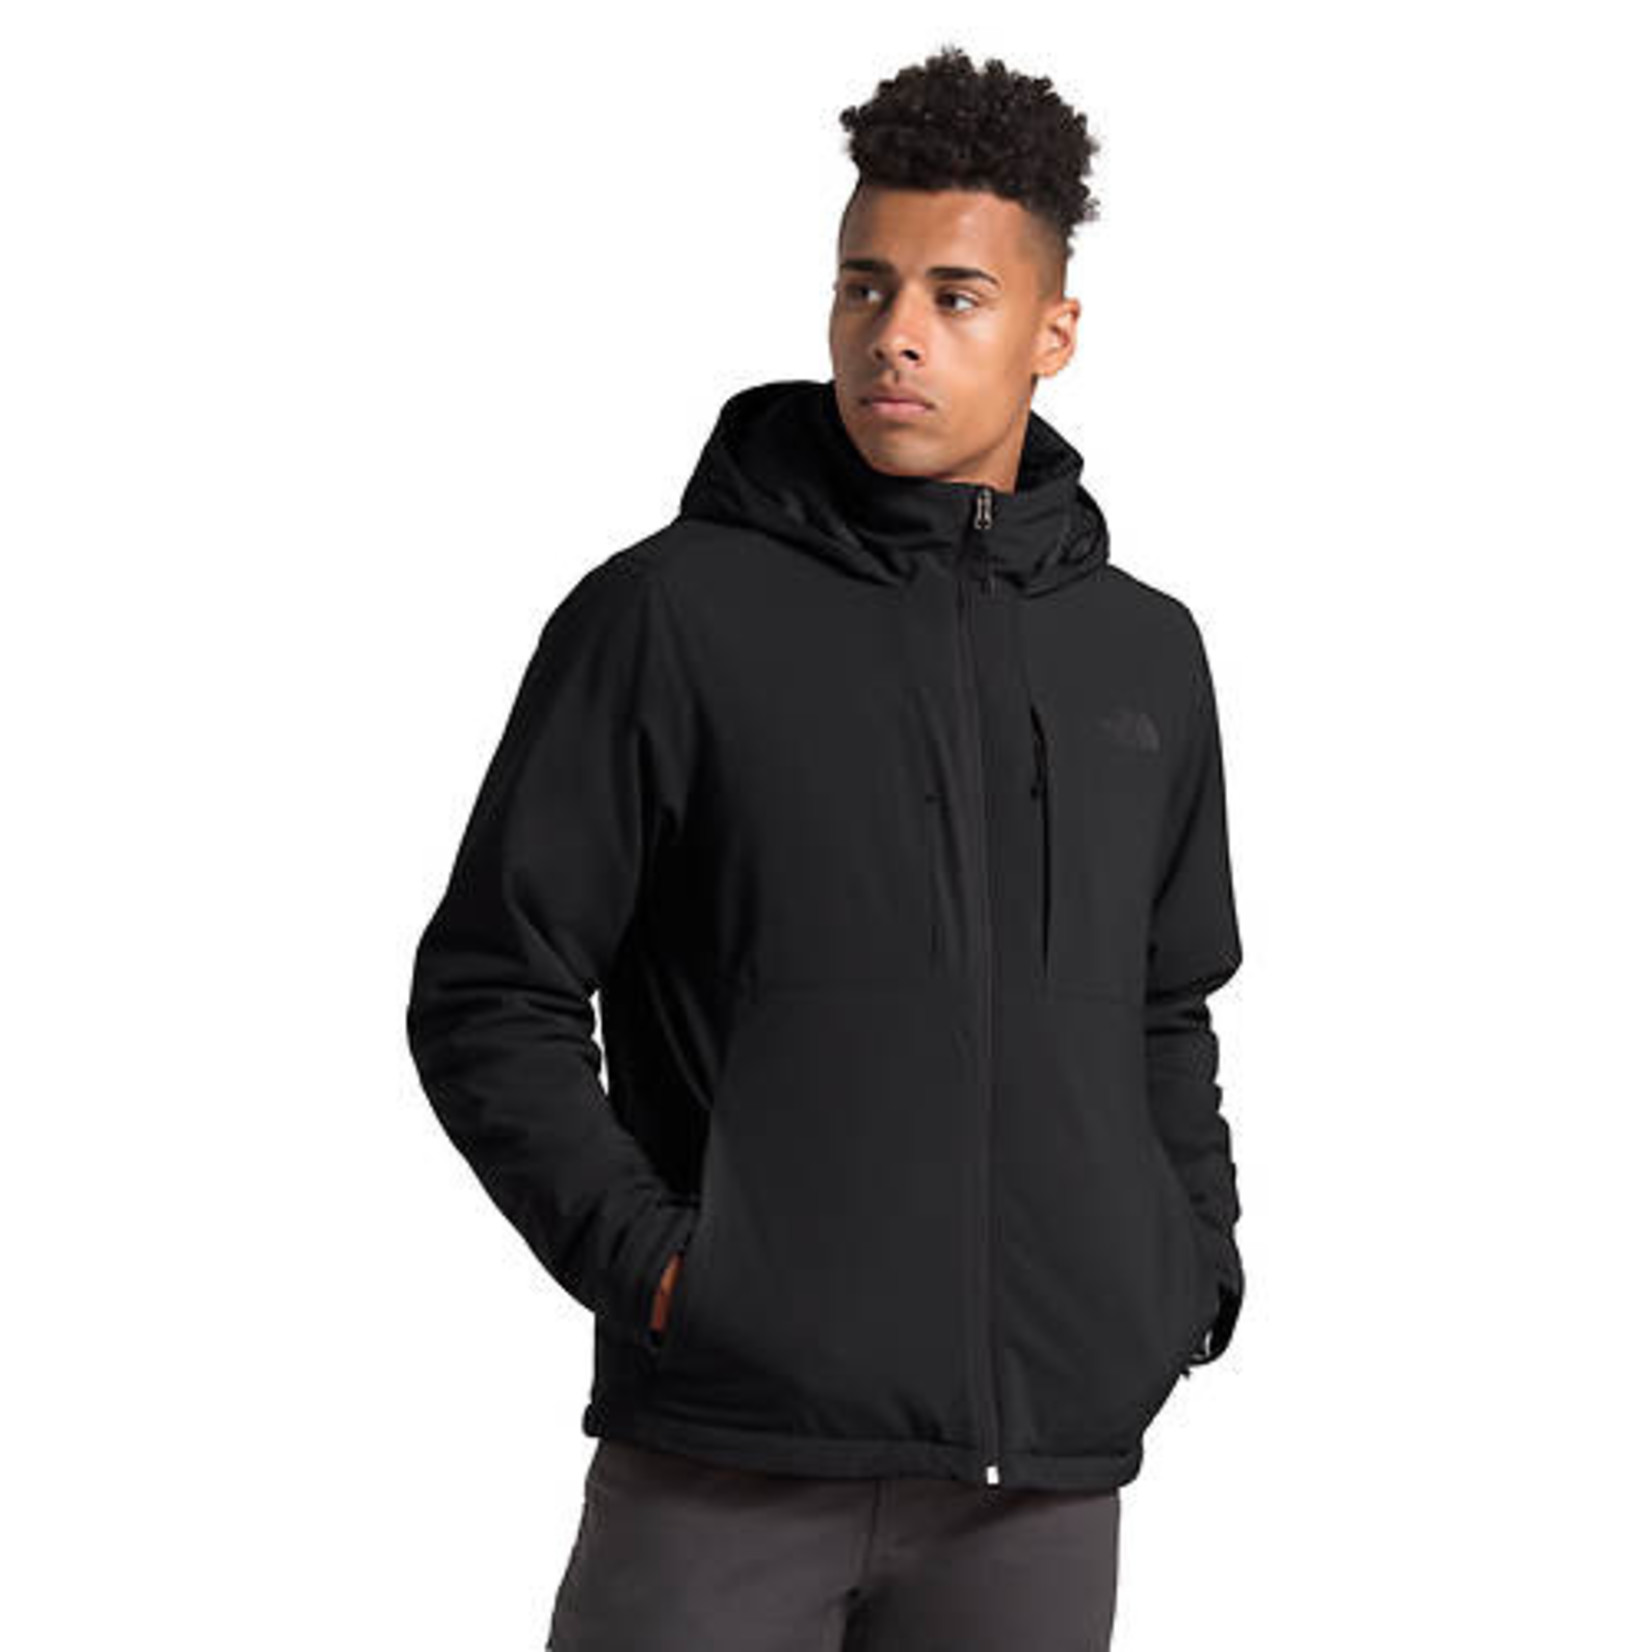 THE NORTH FACE M APEX ELEVATION JACKET